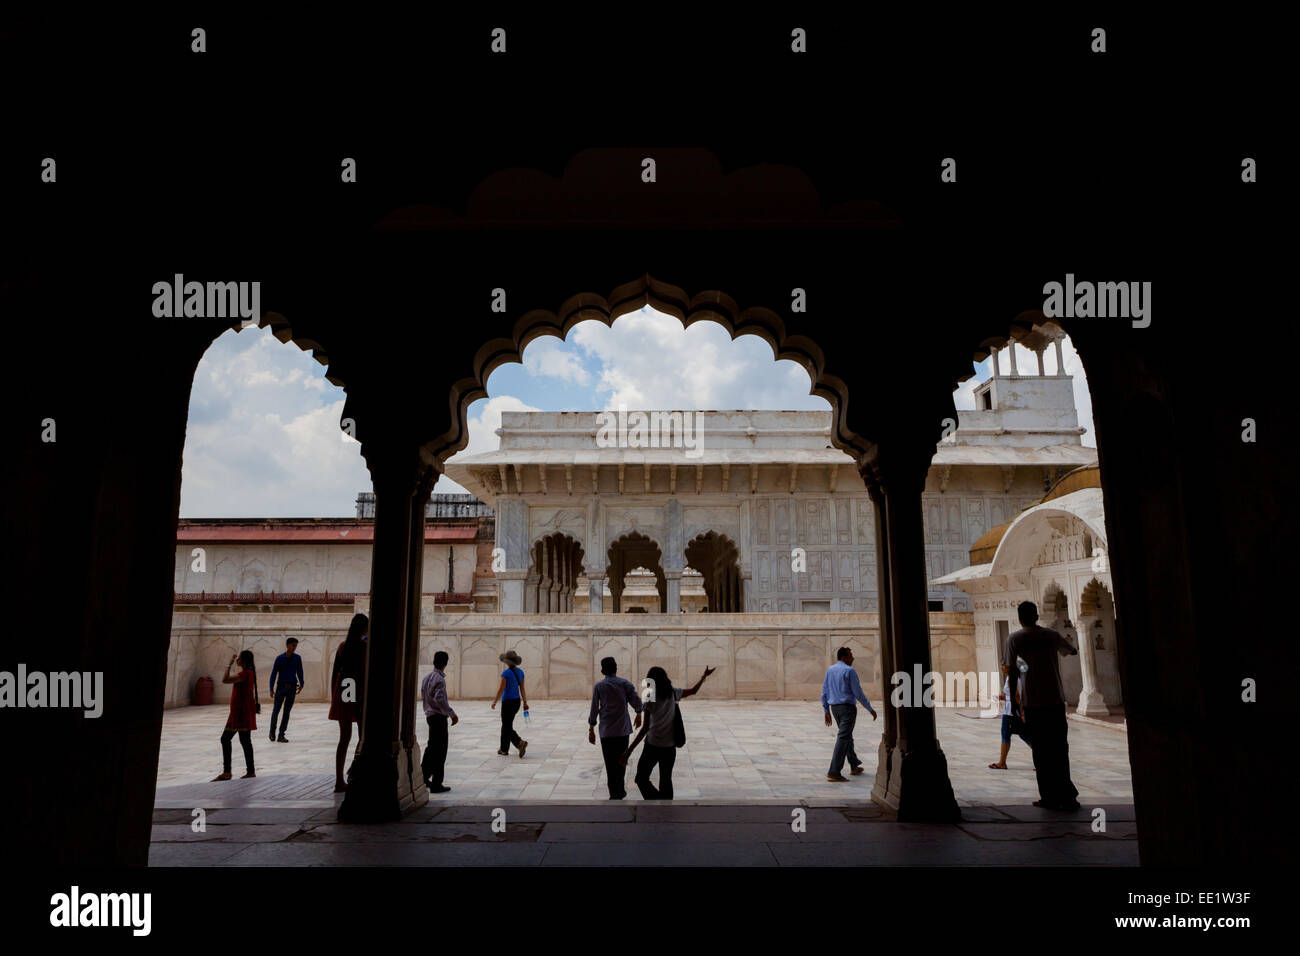 People at the gate of marble building of Nagina Masjid, inside Agra Fort complex. Stock Photo